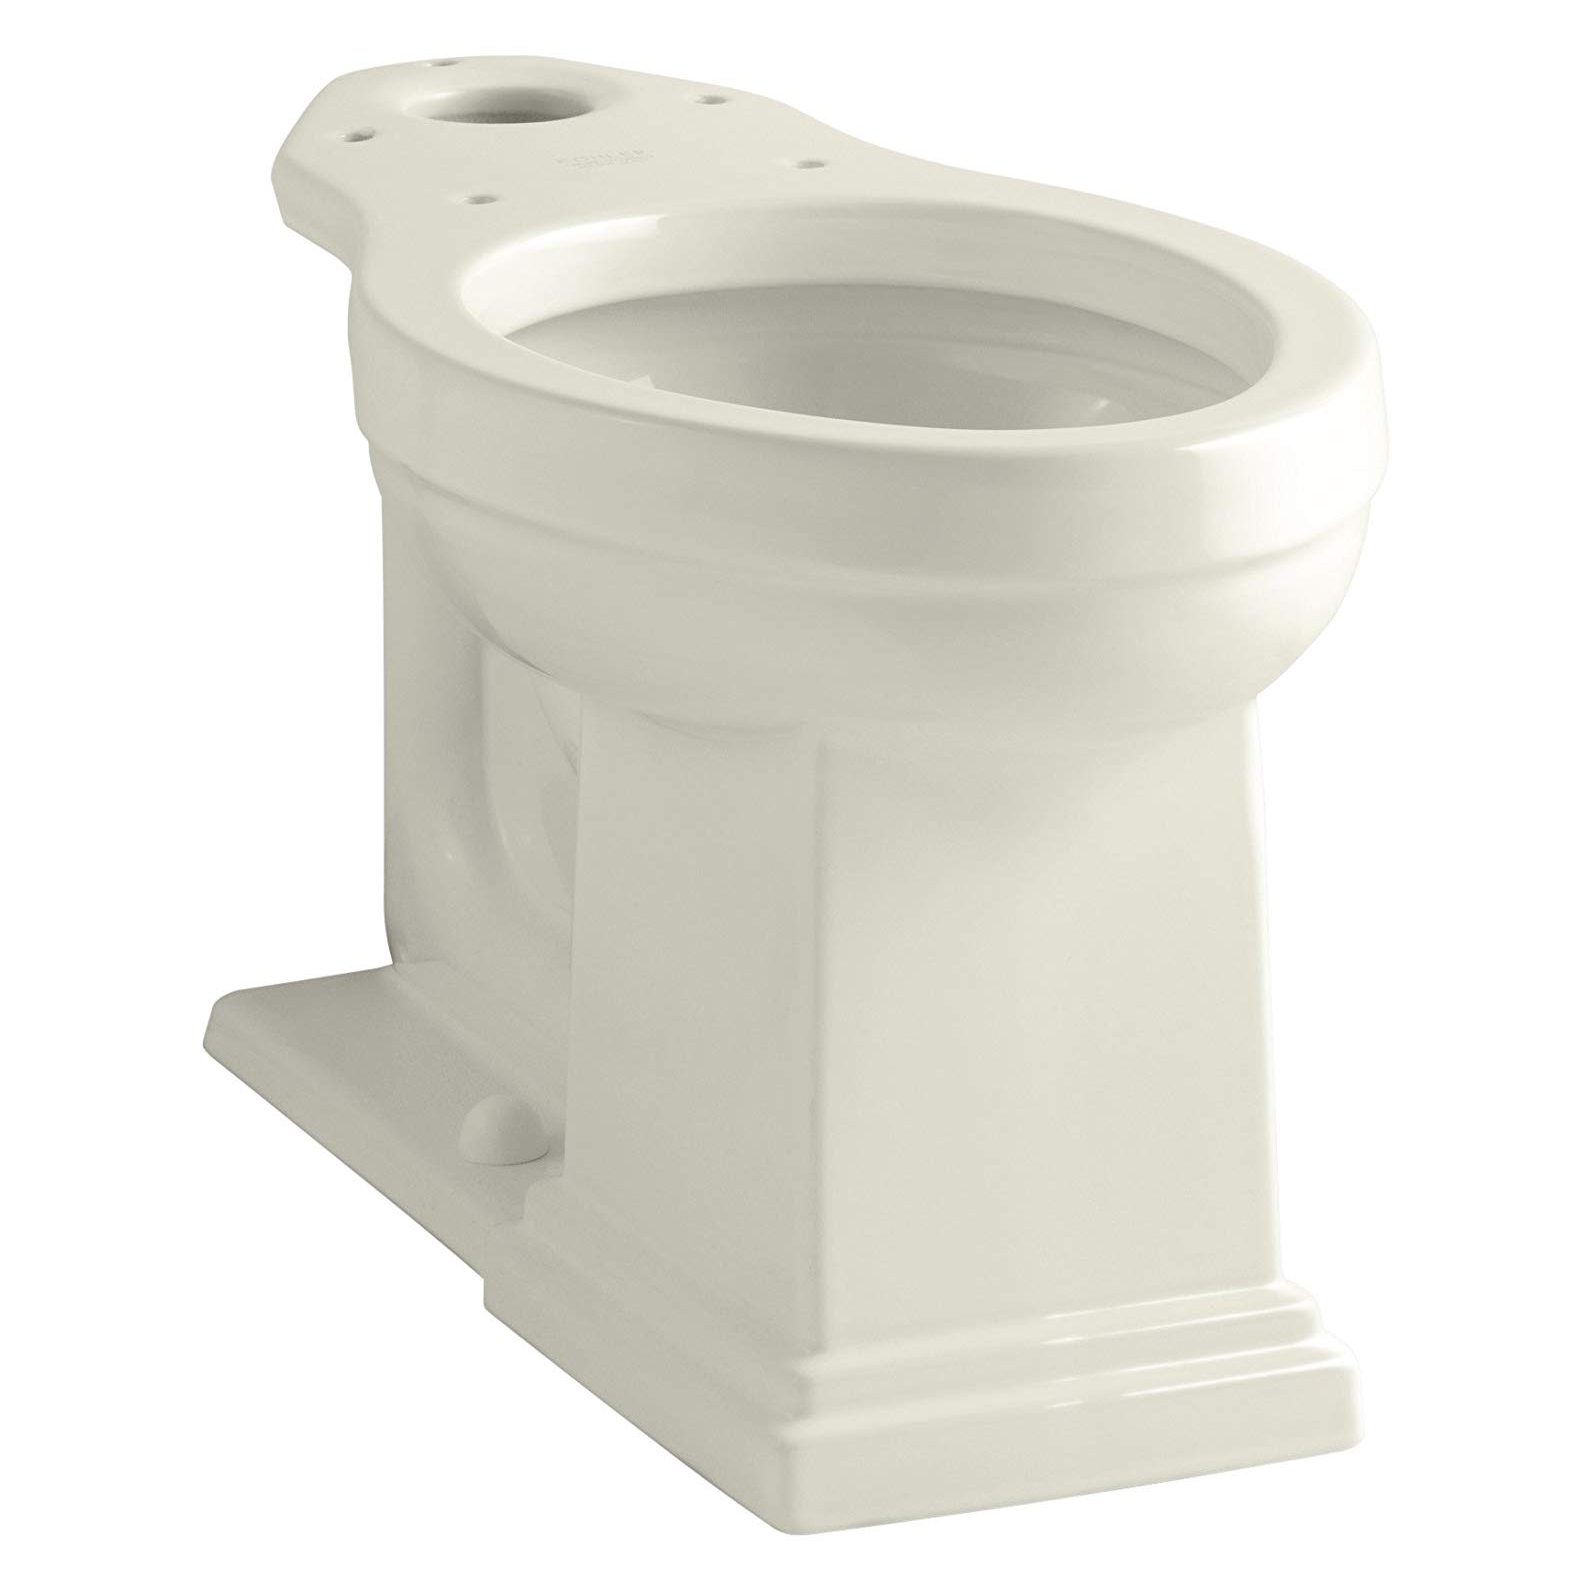 Tresham Comfort Height Elongated Toilet Bowl Only in Biscuit **SEAT NOT INCLUDED**